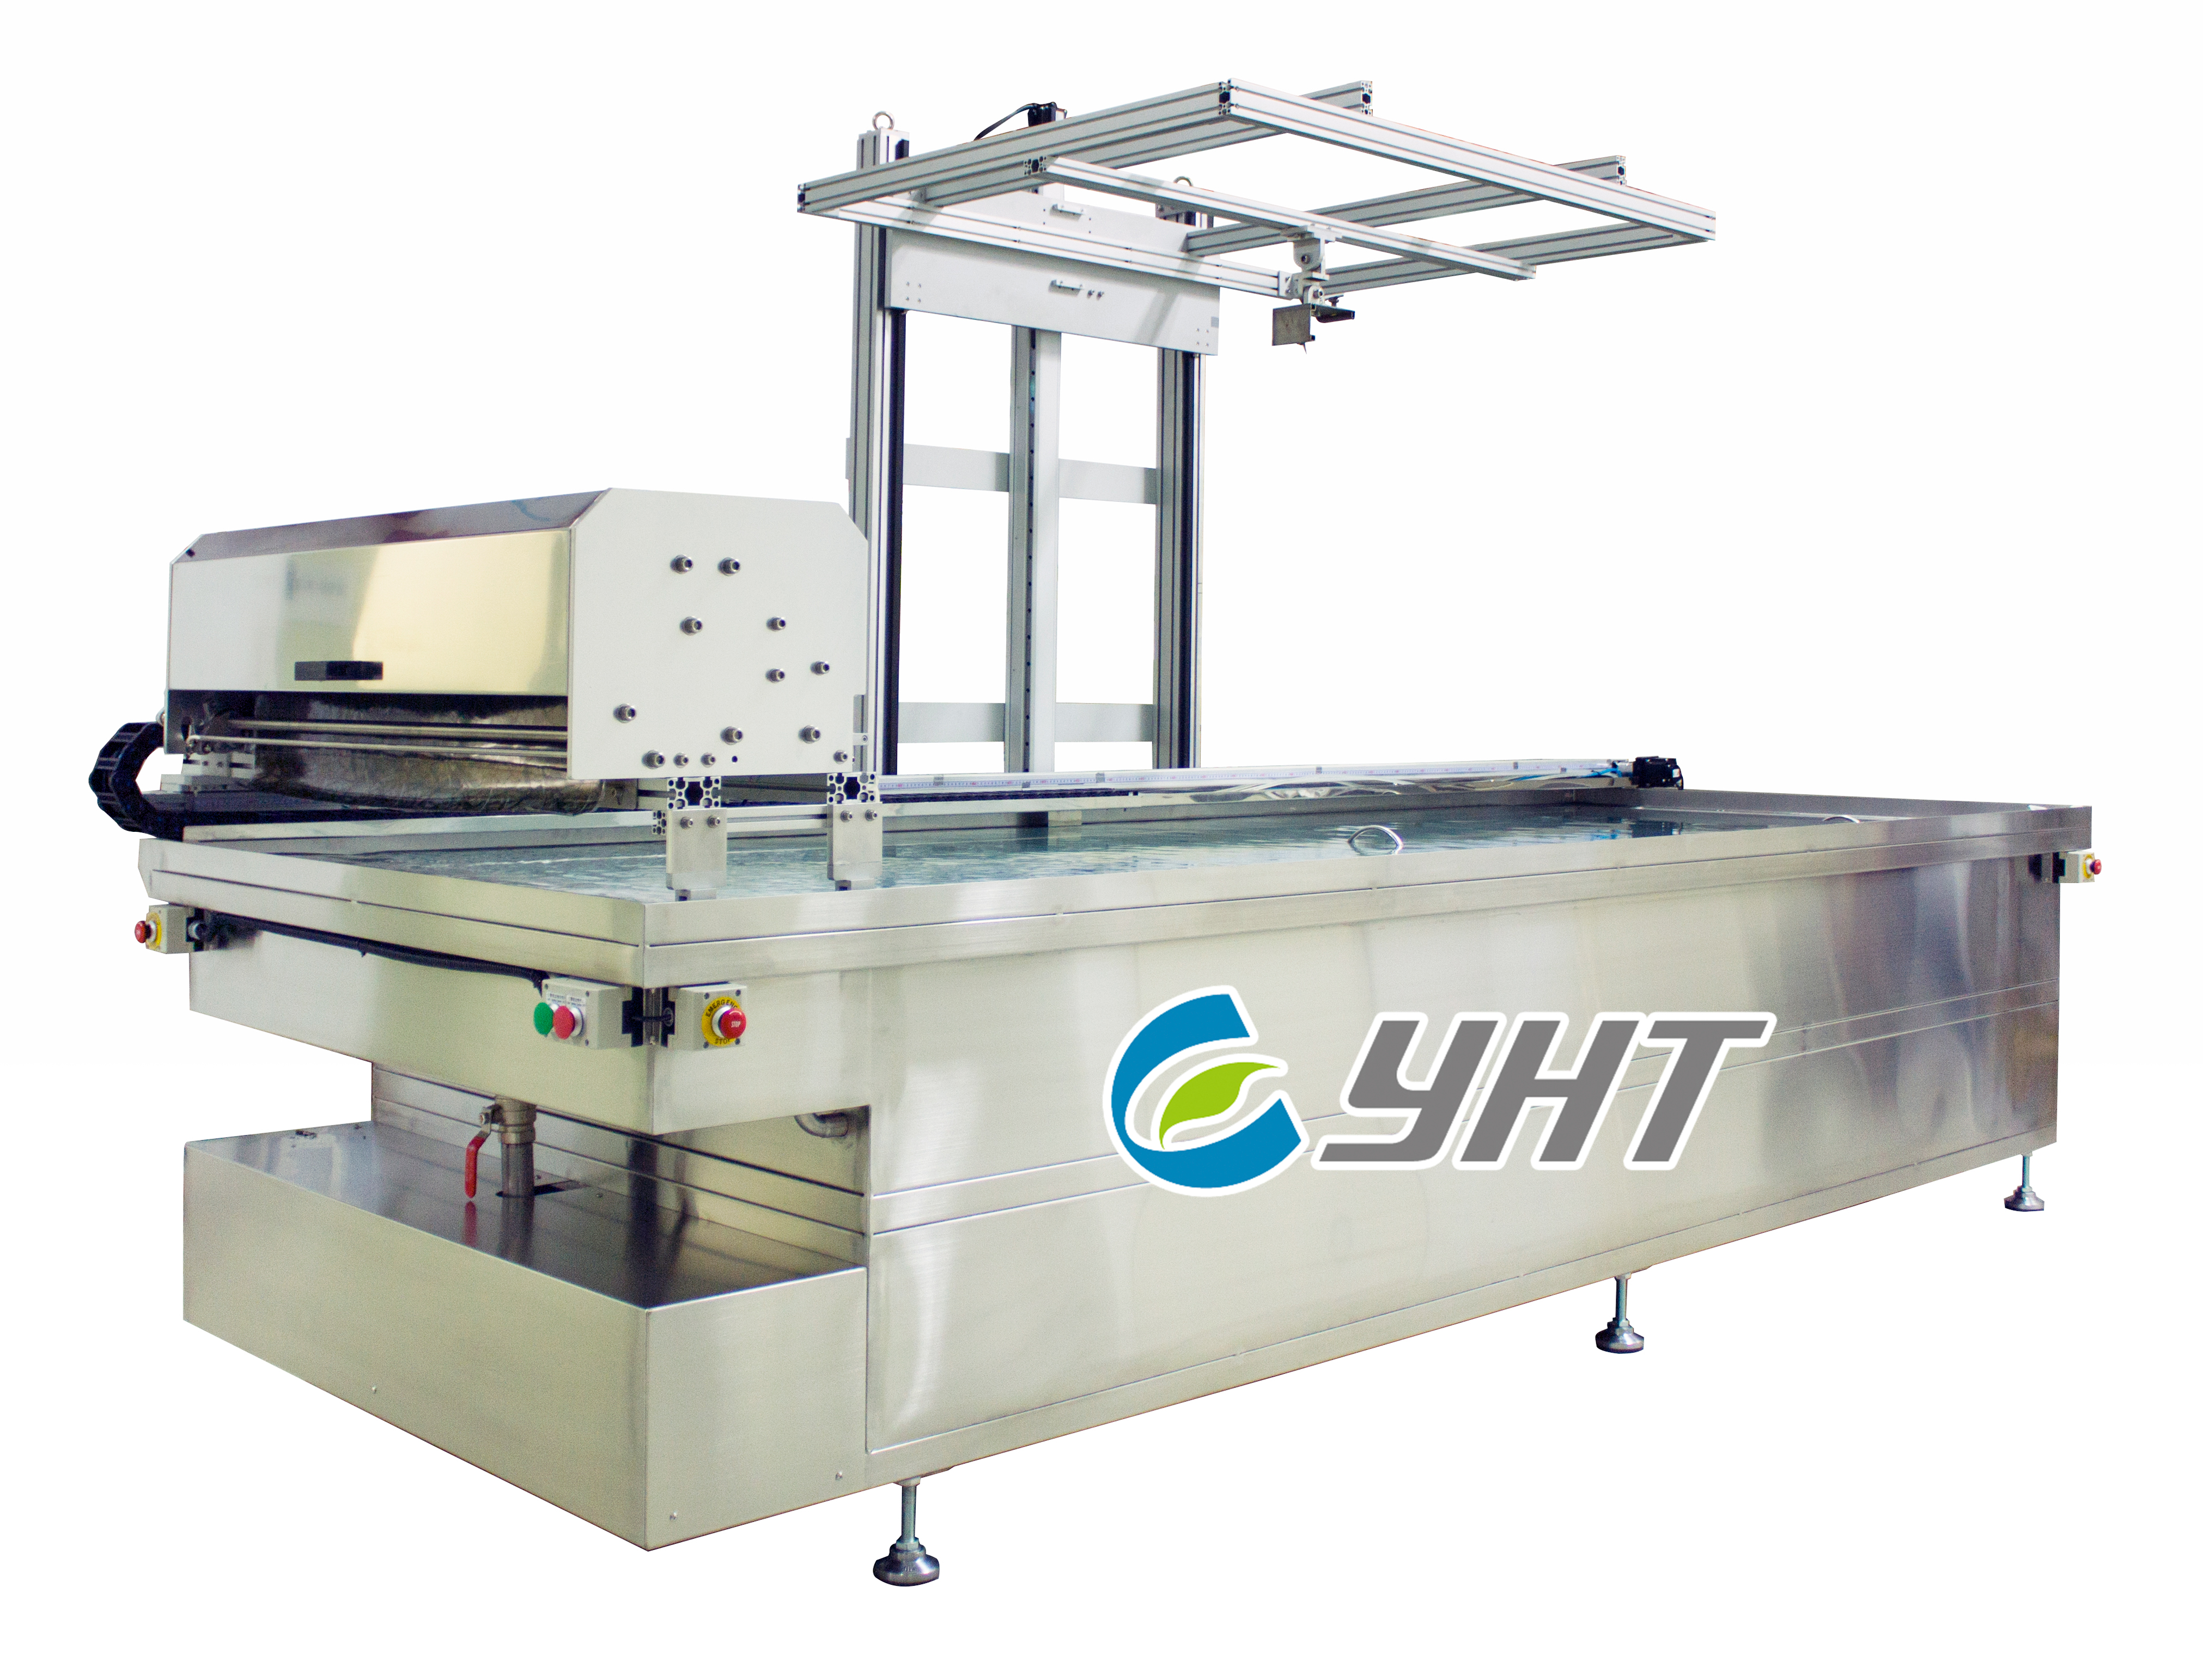 2M Semi-Auto Dipping Machine Equipped with Auto Film Layer + Auto Spray System & Production Arm